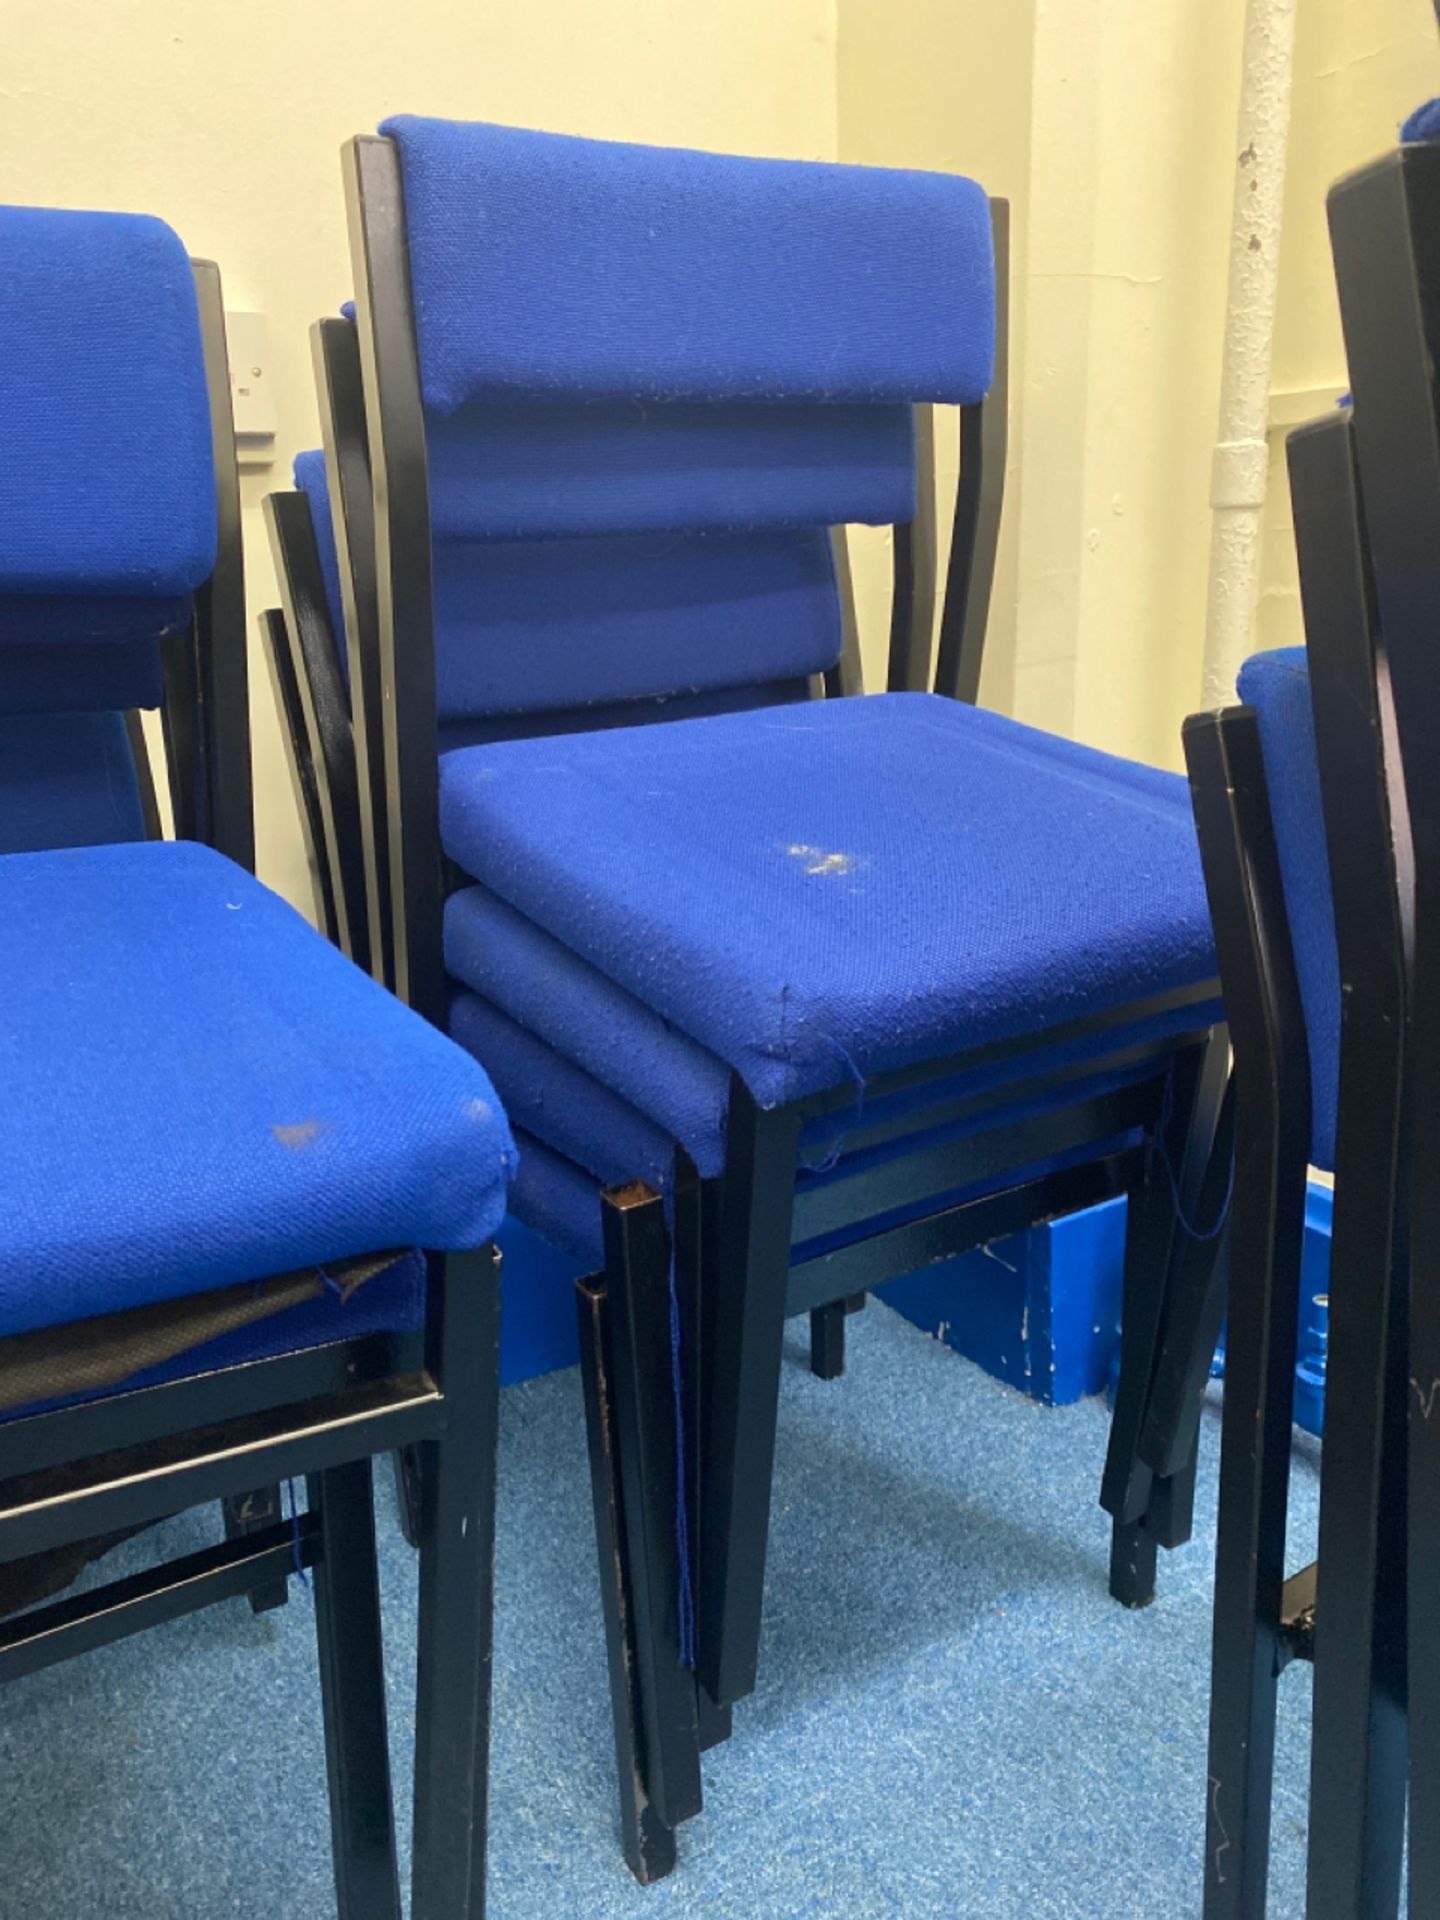 Set of 4 Cusioned Classroom Chairs - Image 11 of 12